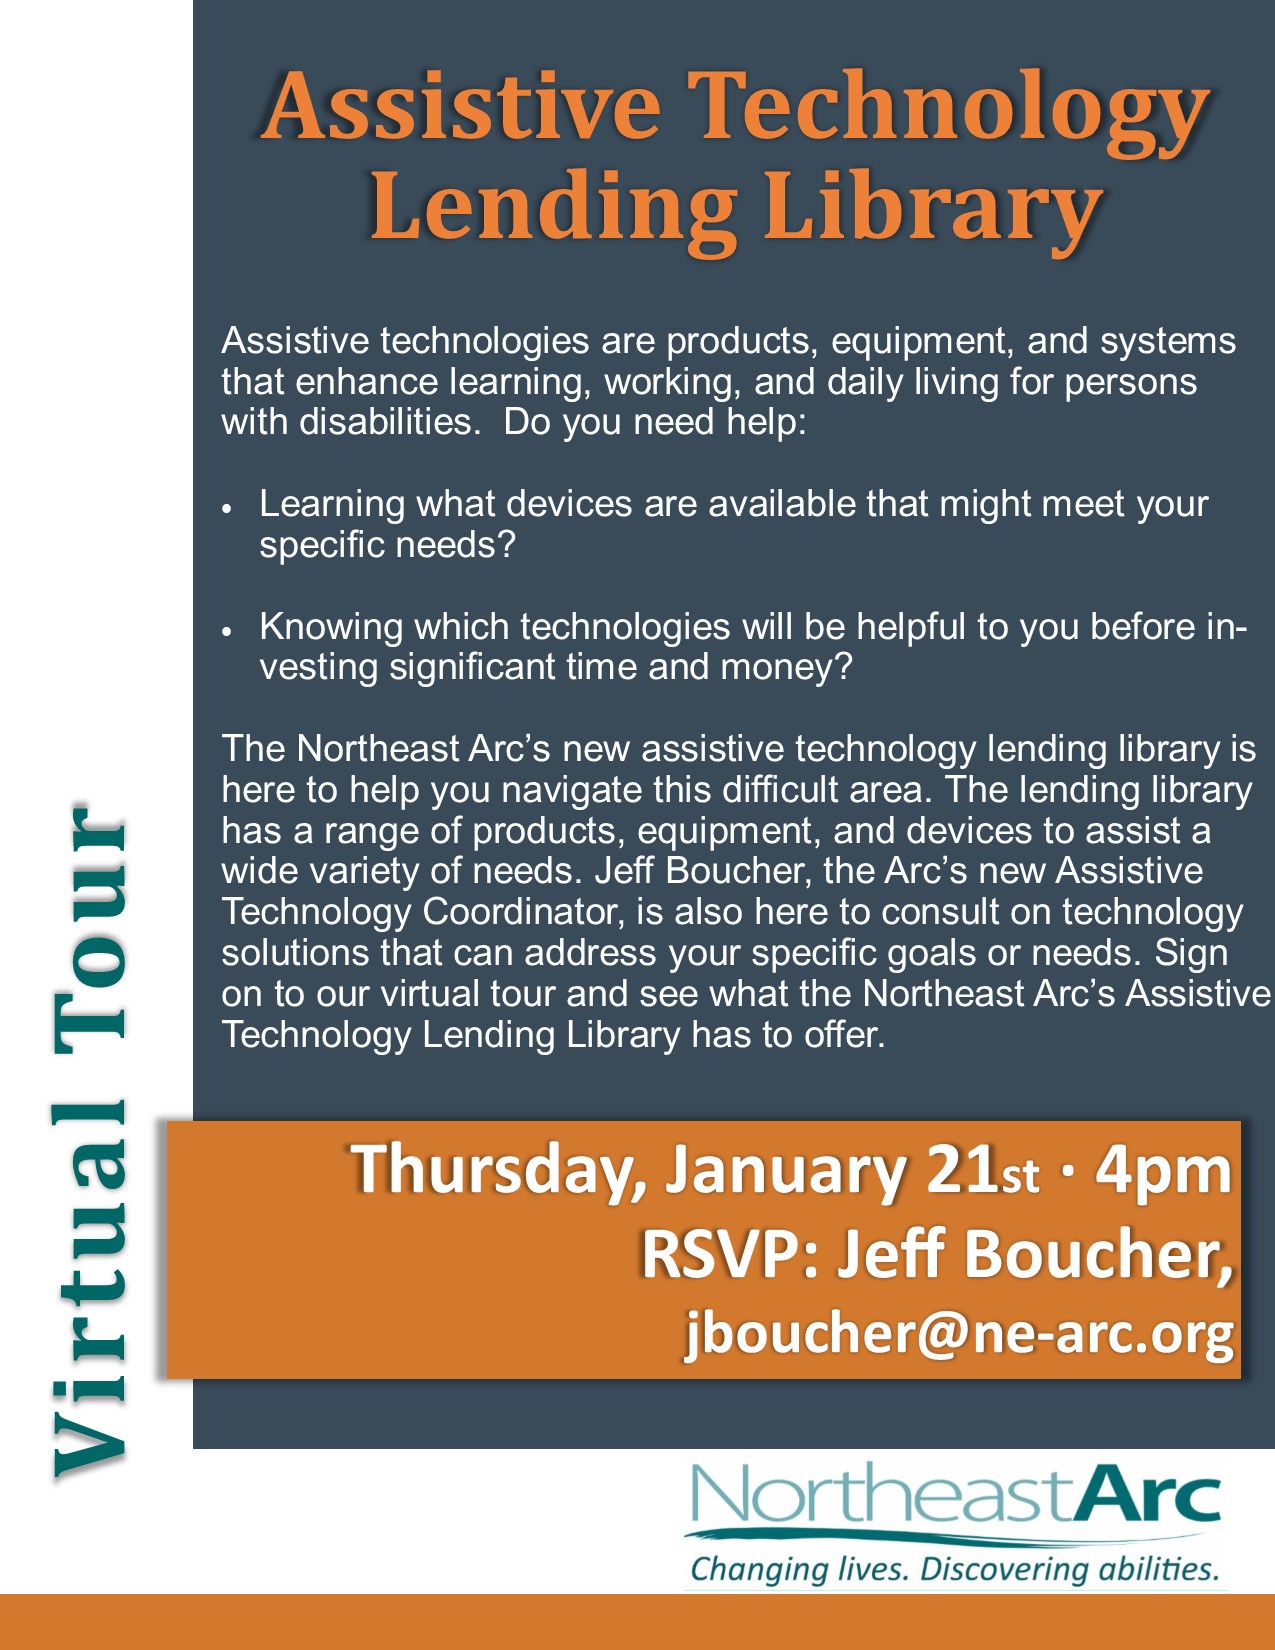 Virtual Tour Assistive Technology Lending Library; January 21st at 4 pm; RSVP with Jeff at jboucher@ne-arc.org